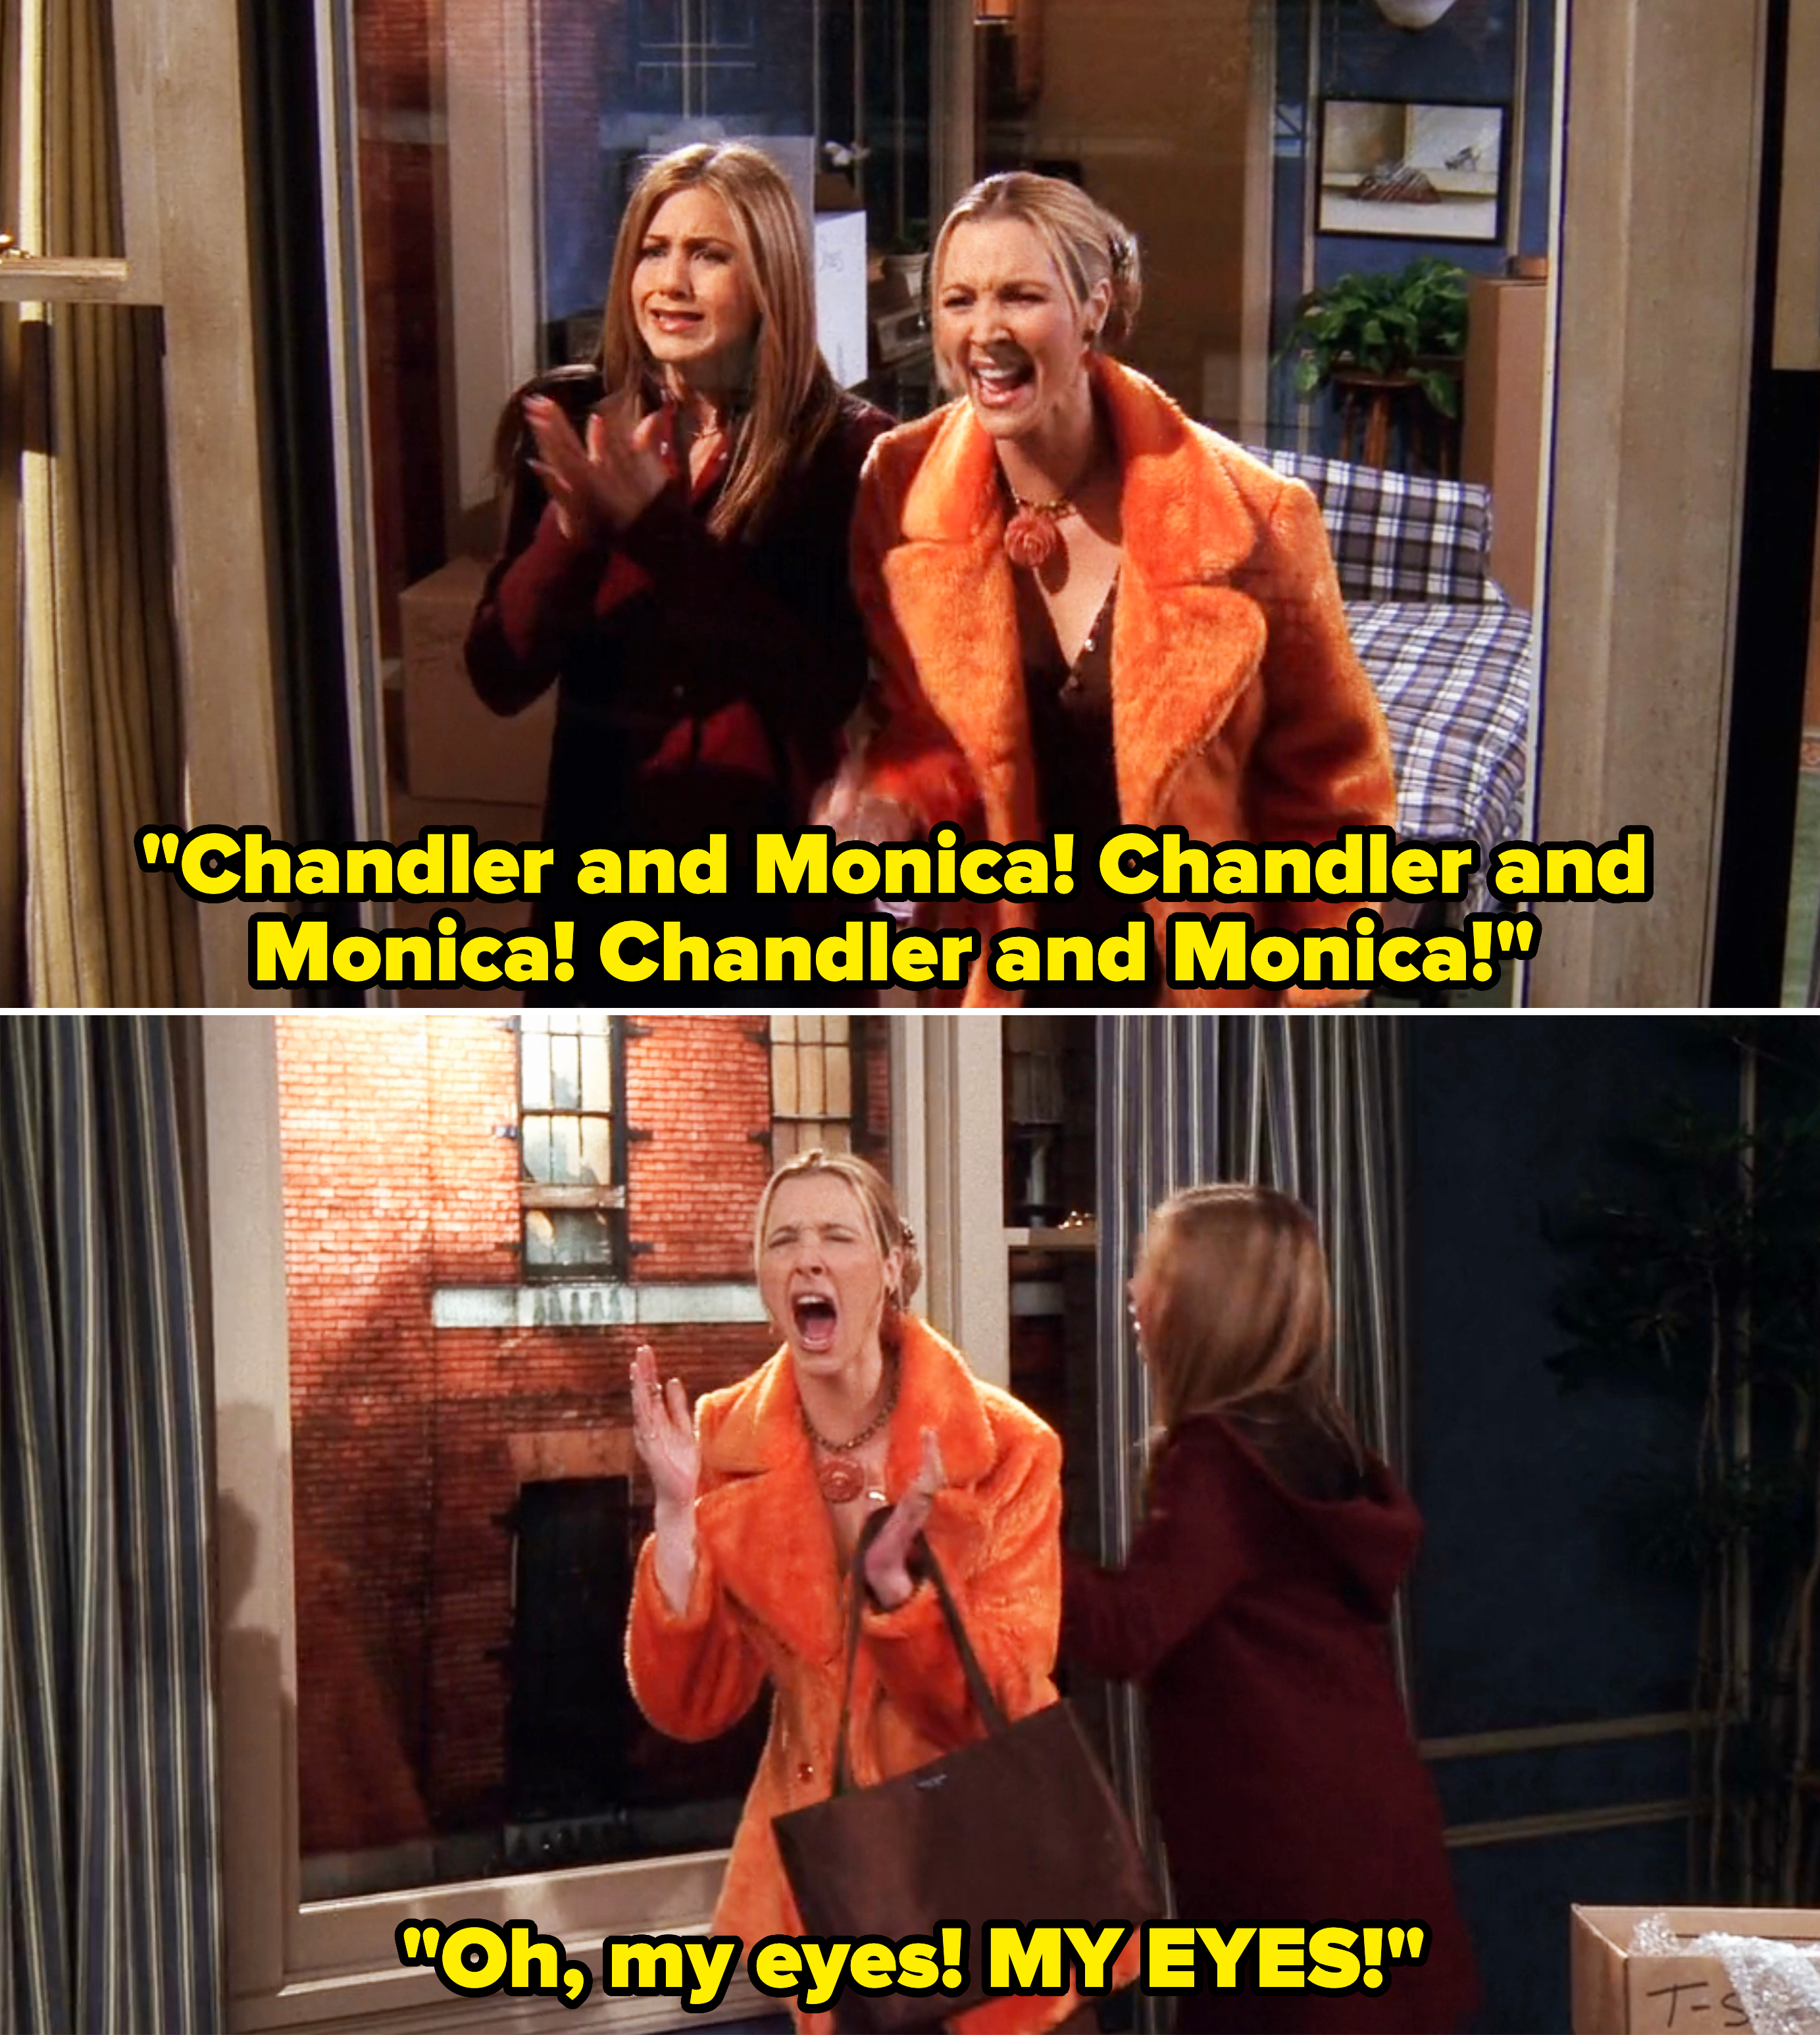 phoebe screaming after seeing chandler and monica